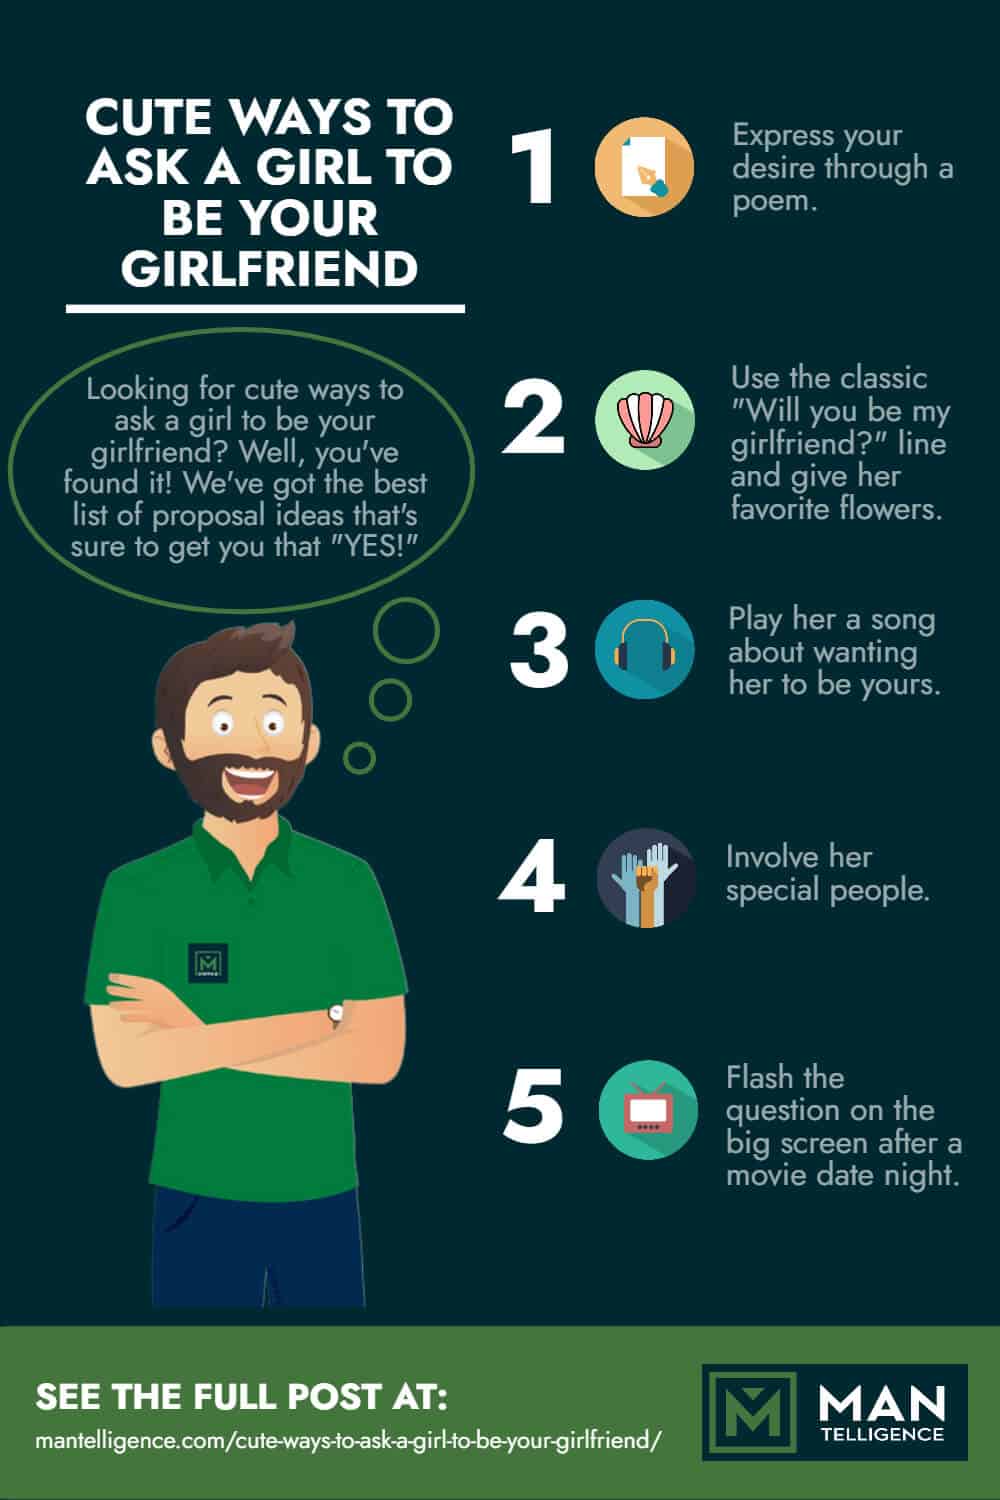 What should i ask my girlfriend